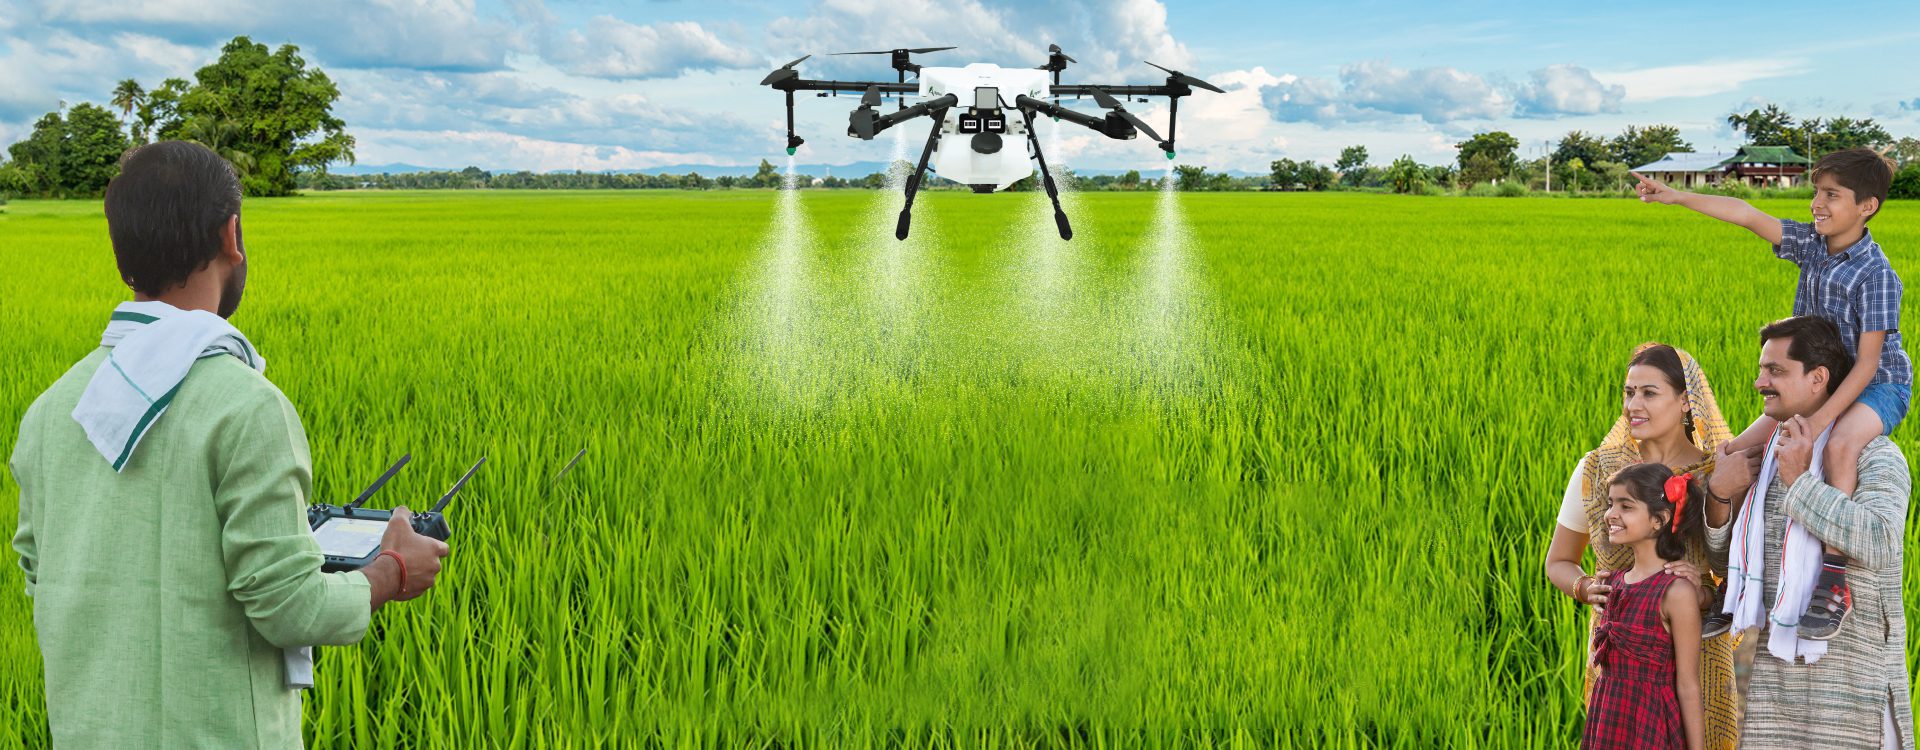 Pioneer in Agriculture Drone